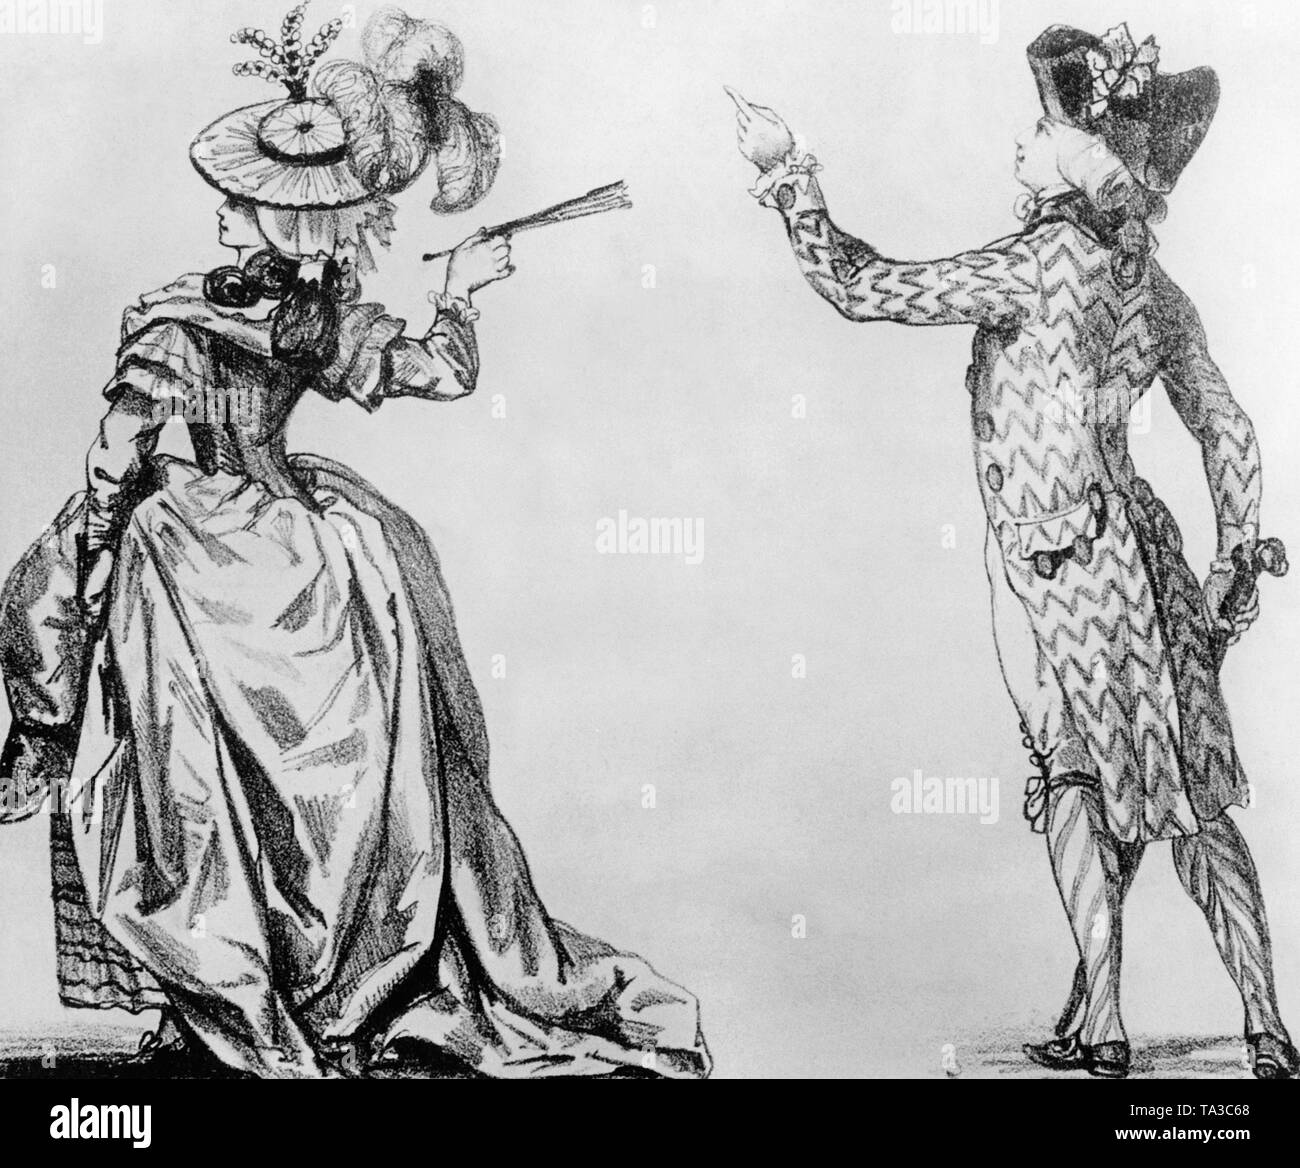 Illustration of women's and men's fashion around 1790. They both wear hats. Stock Photo